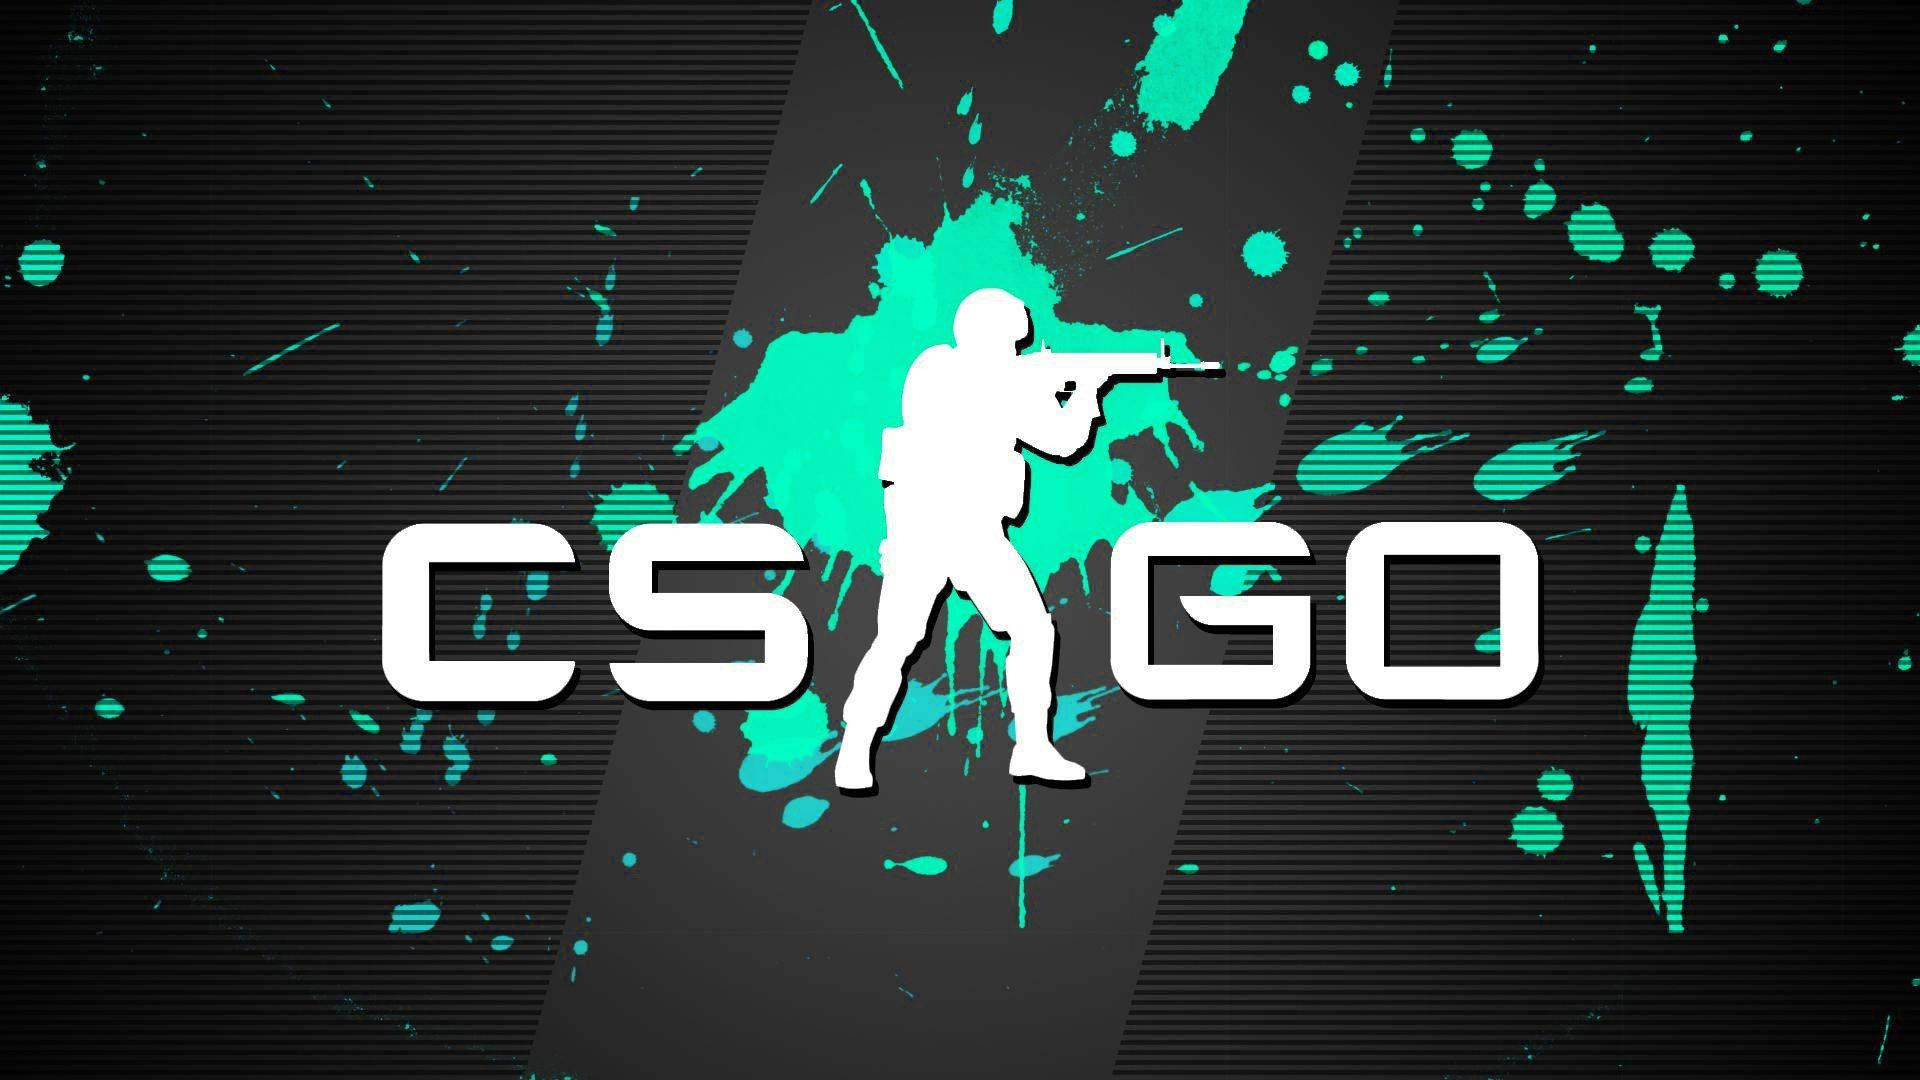 Free Csgo Wallpaper Downloads, [100+] Csgo Wallpapers for FREE |  